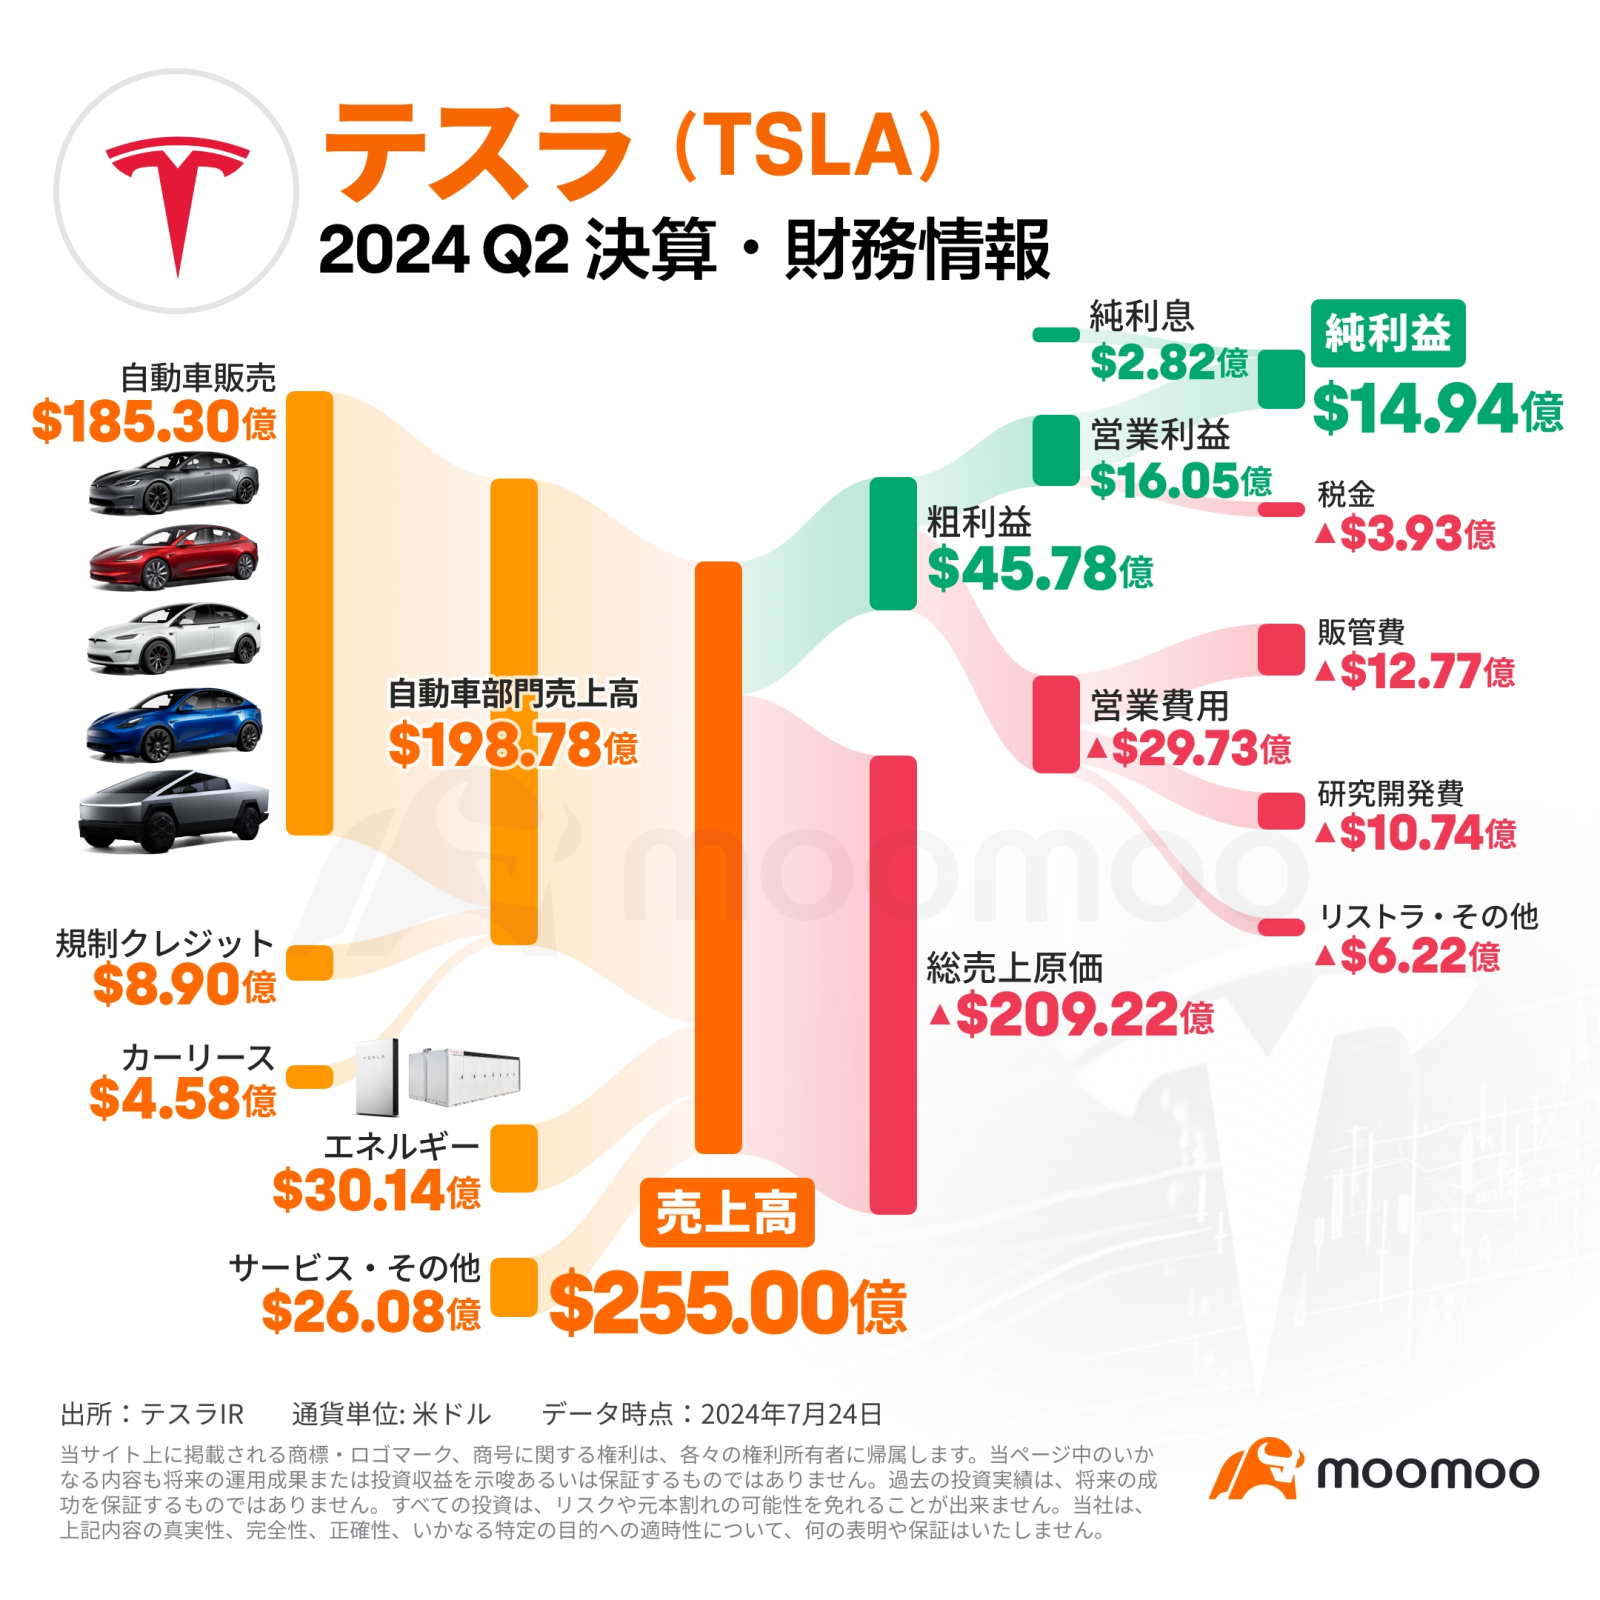 [Financial Summary] Tesla's decline outside of time to receive financial results What are future highlights?